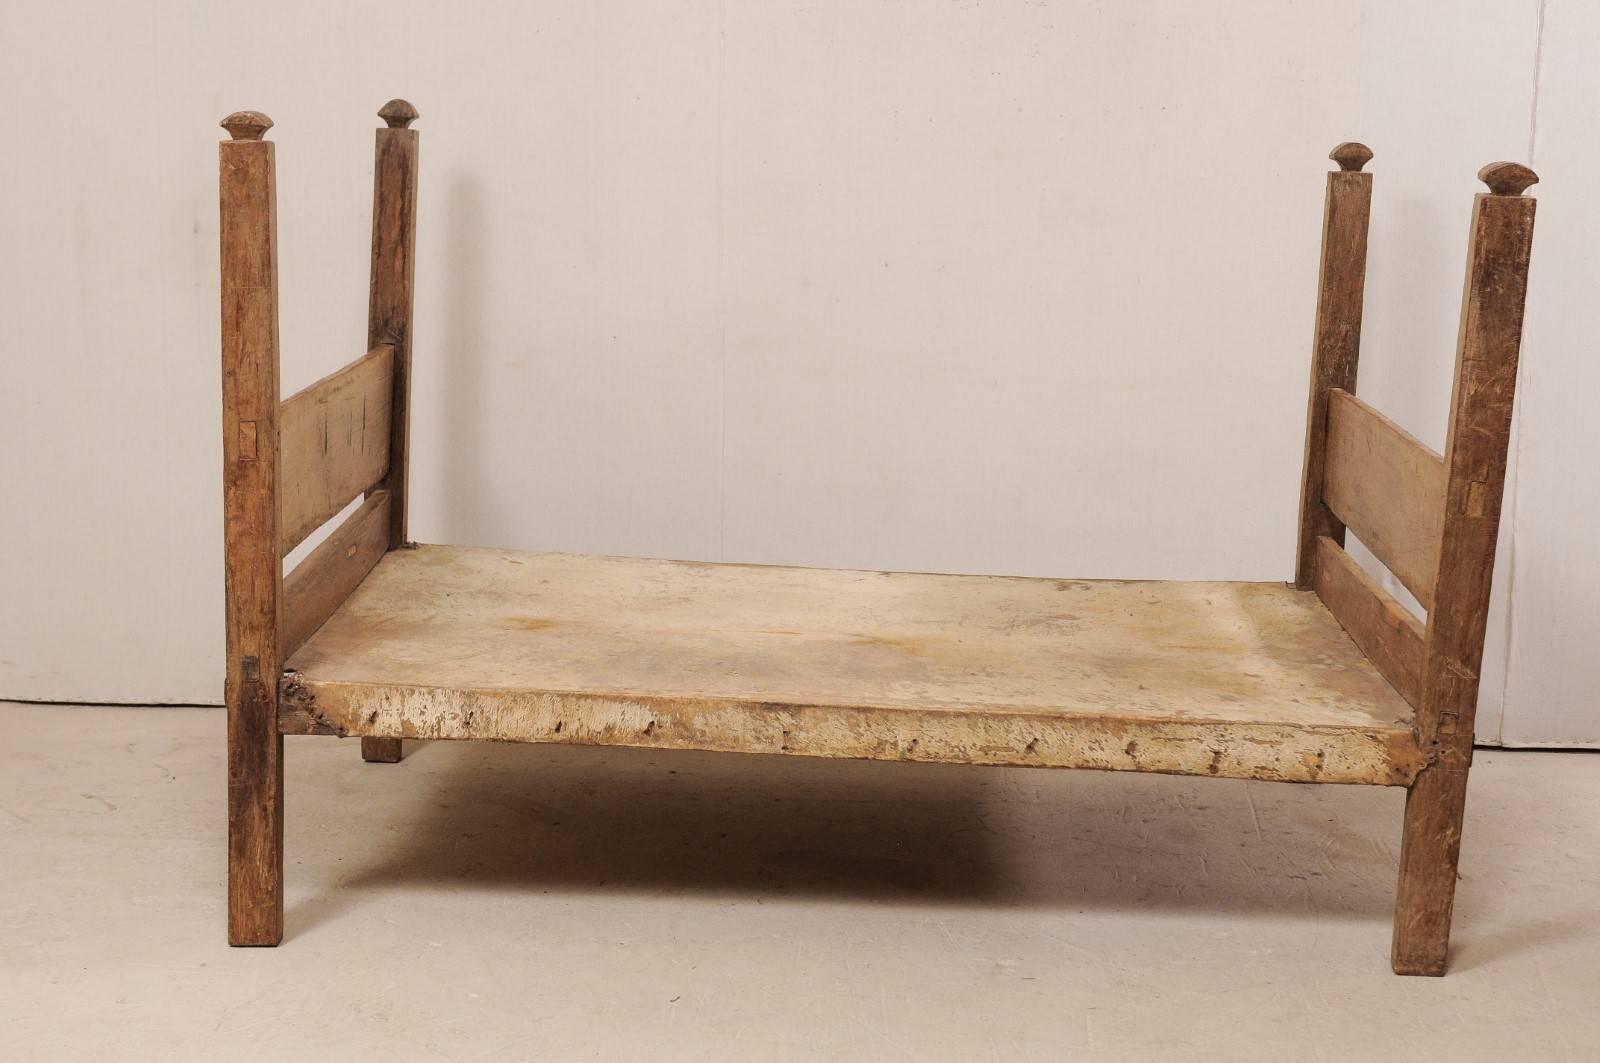 A vintage Brazilian cowhide and wood frame single size daybed. This Brazilian bed, which is sized between a twin and double, features simplistic wooden foot and headboards, four squared legs, which extend upward into posts with carved finials